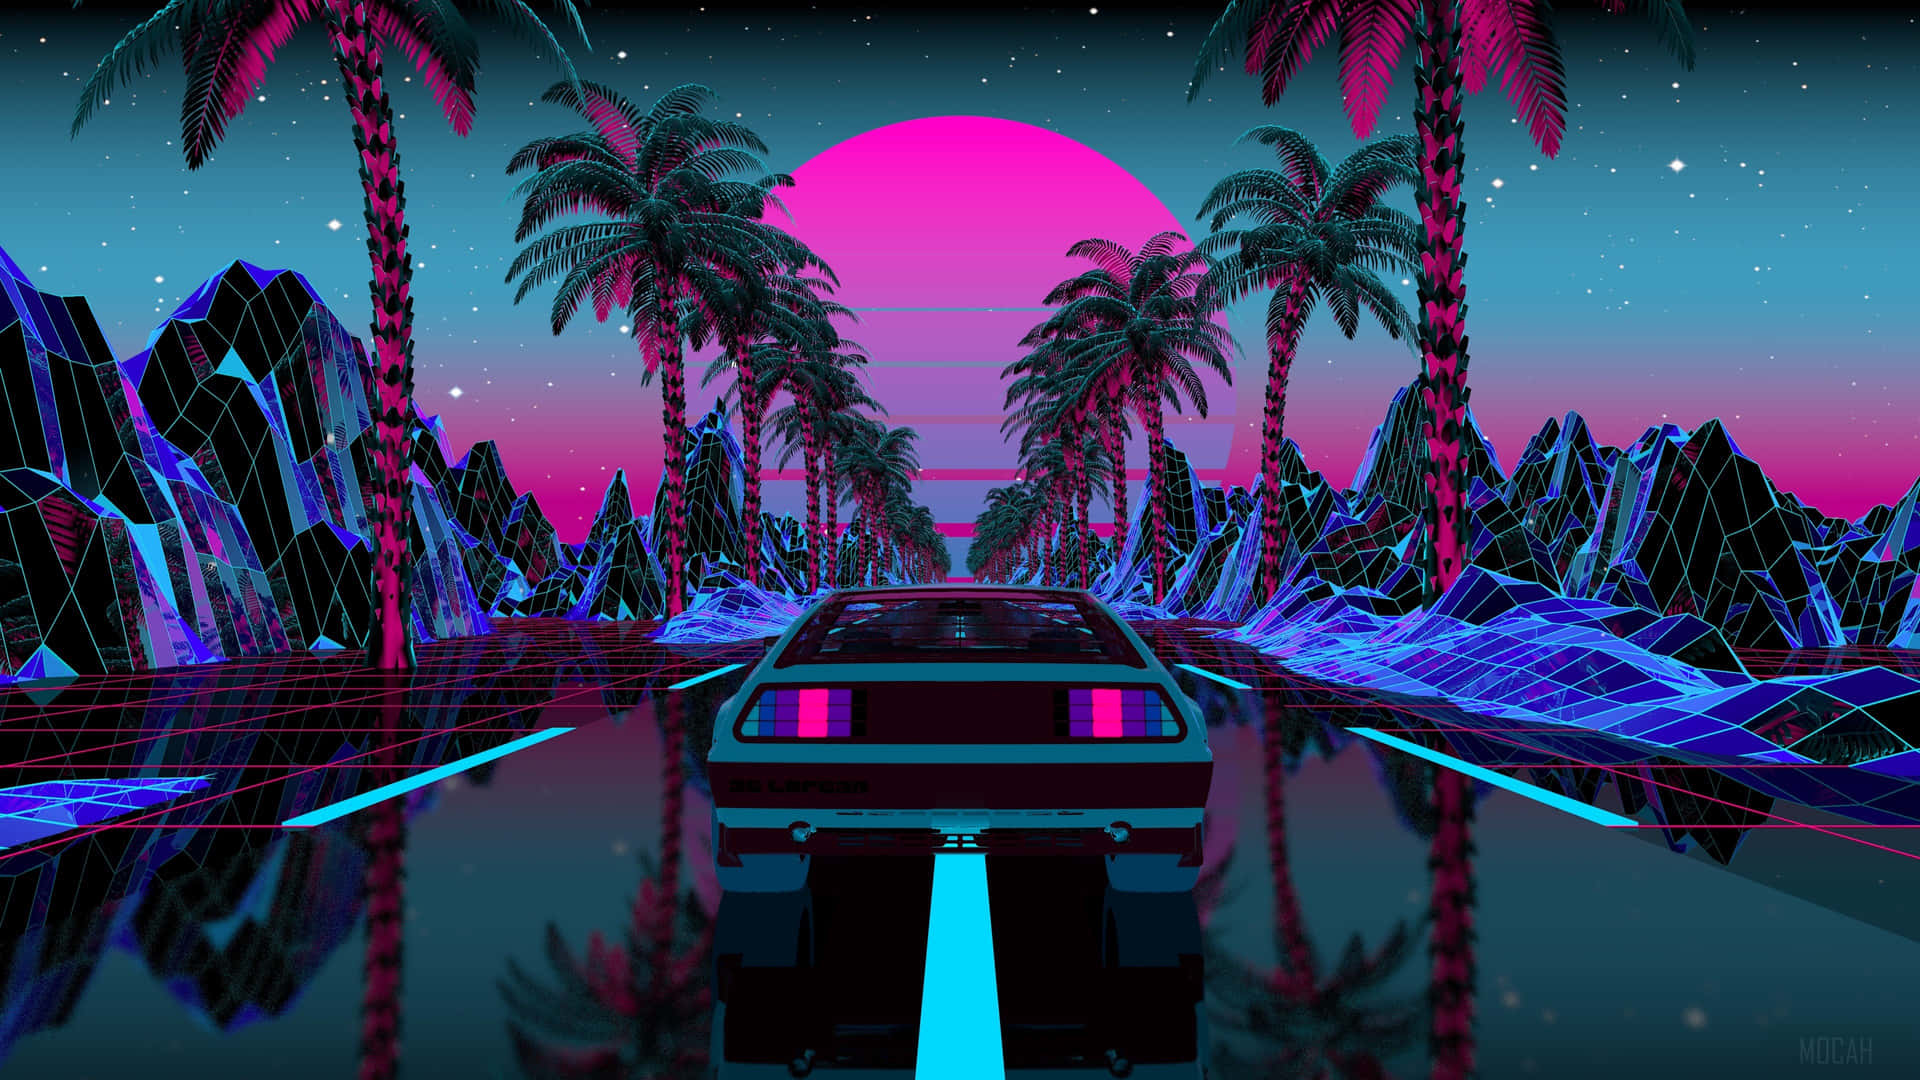 200+] Synthwave Background s | Wallpapers.com